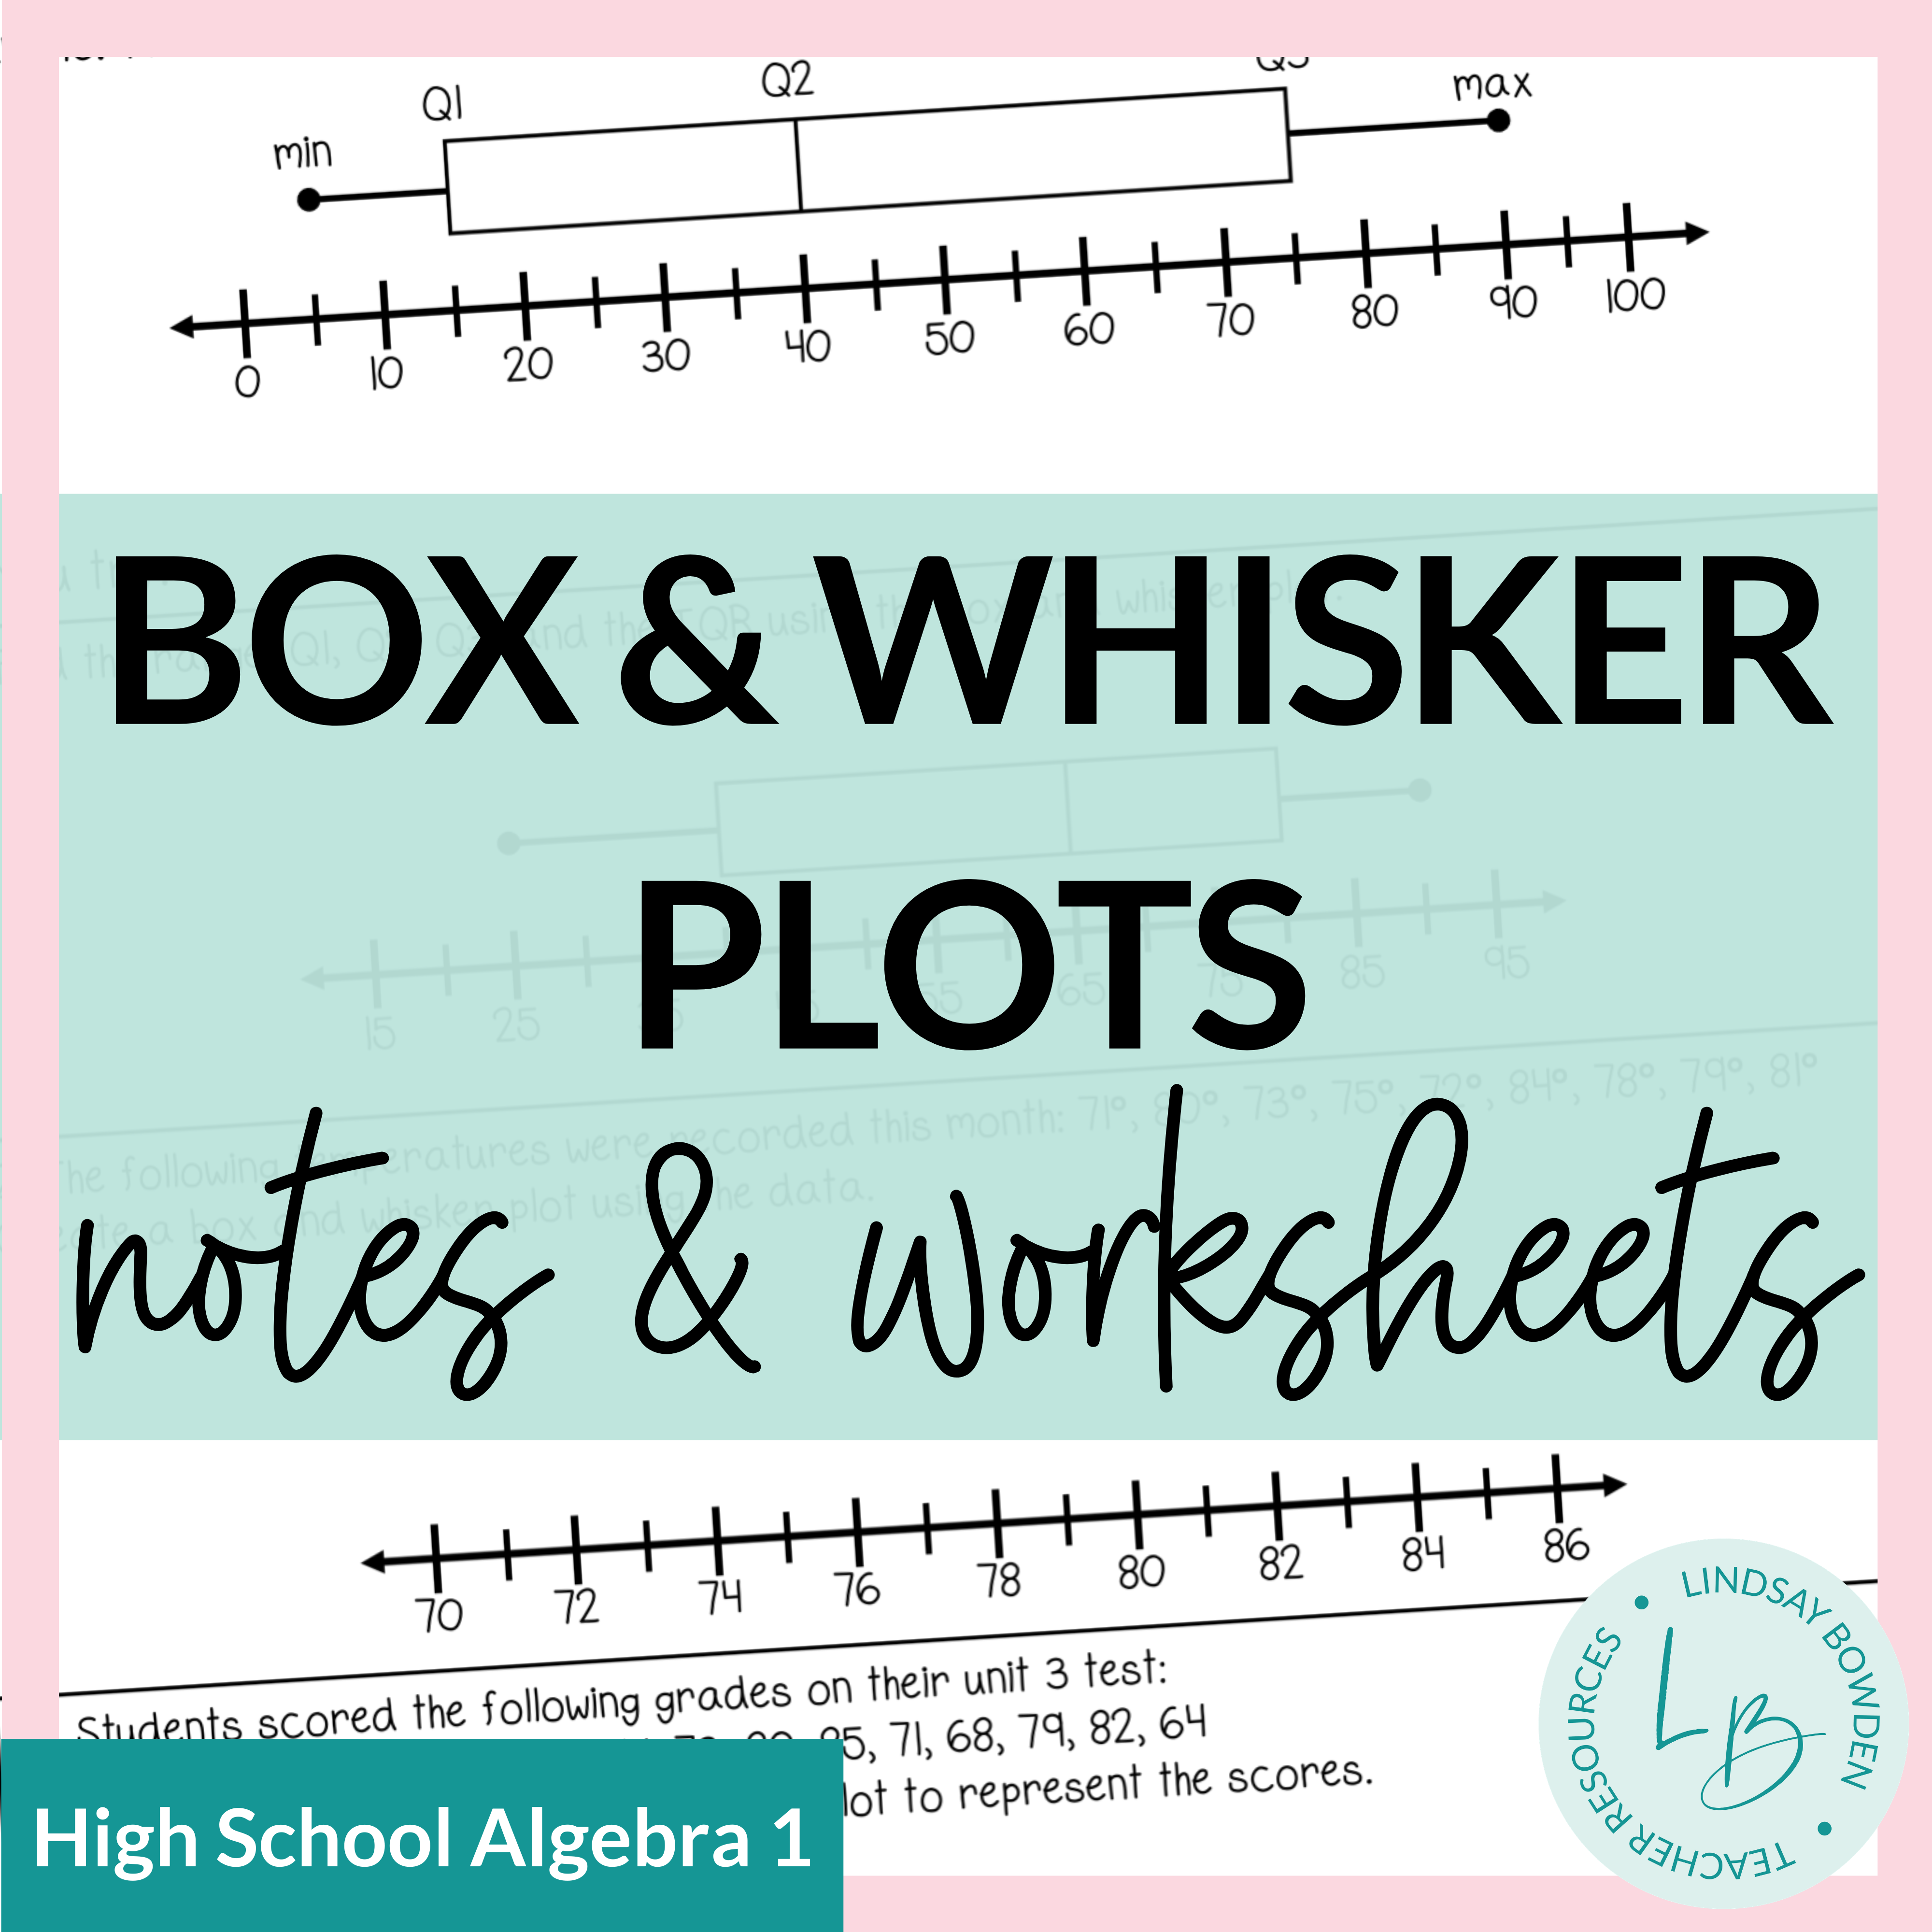 Box and Whisker Plots Notes and Worksheets - Lindsay Bowden Regarding Box And Whisker Plot Worksheet